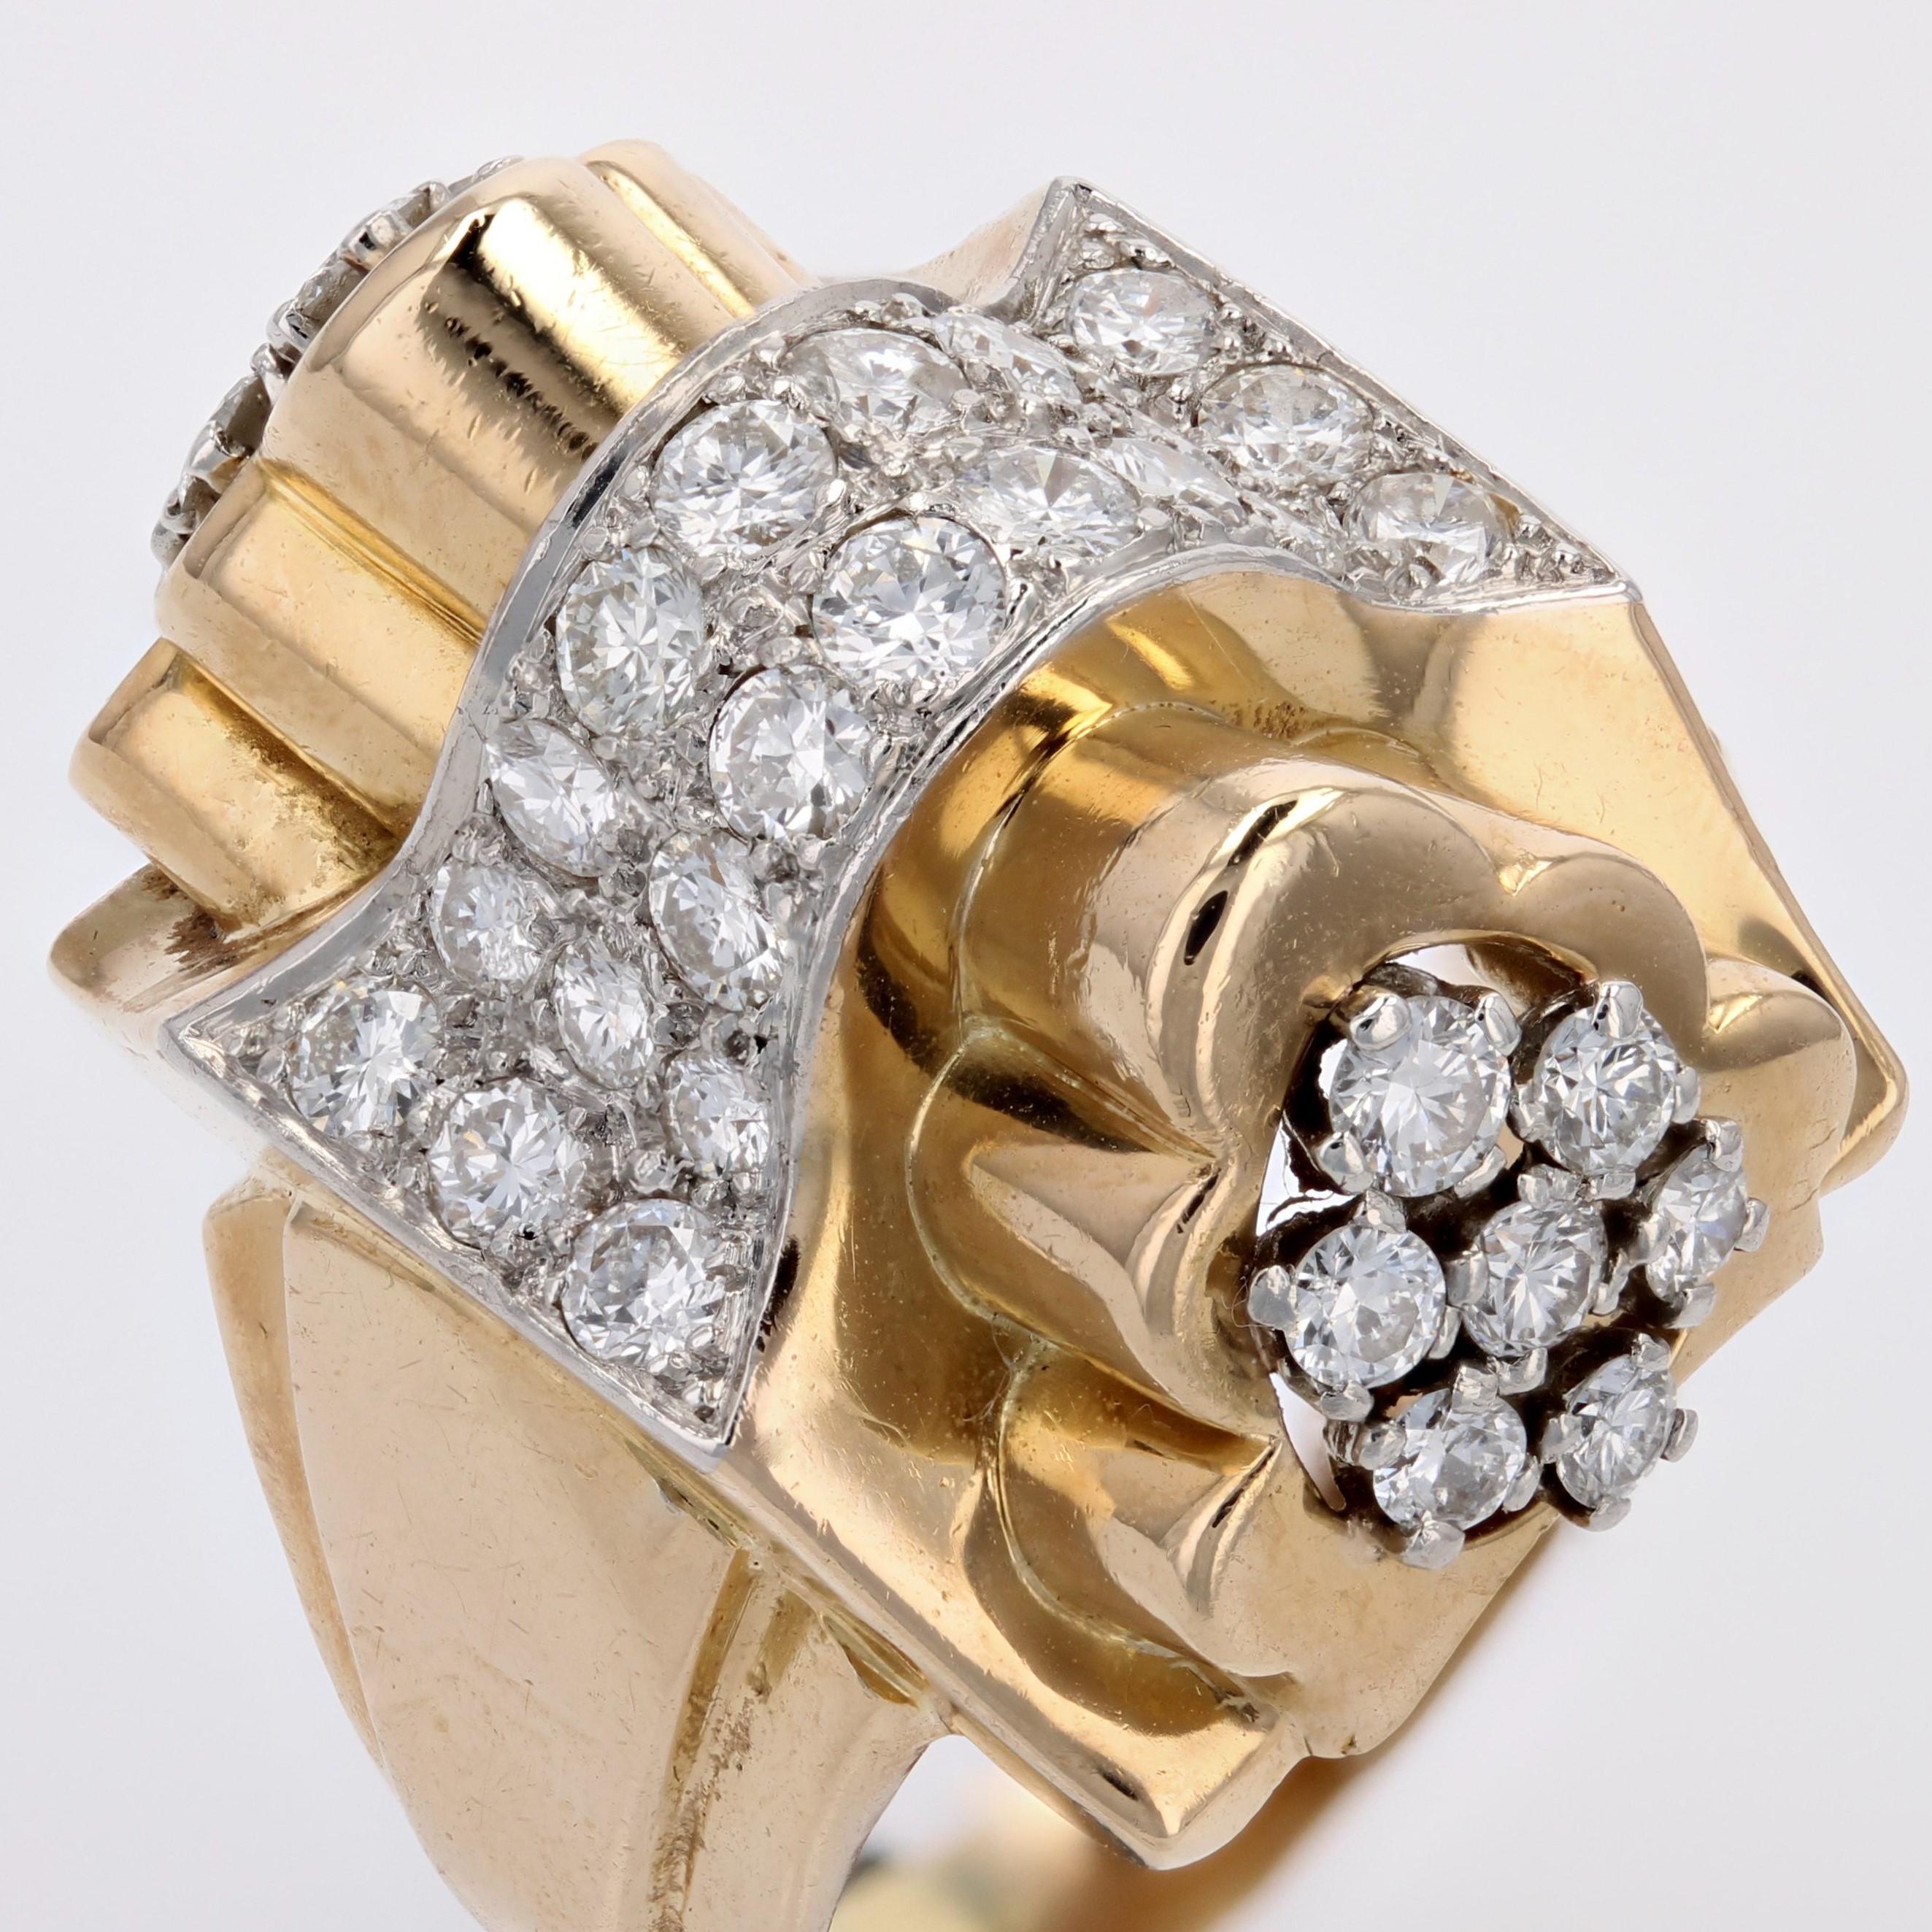 Brilliant Cut French 1940s Diamonds 18 Karat Yellow Gold Knot Tank Ring For Sale